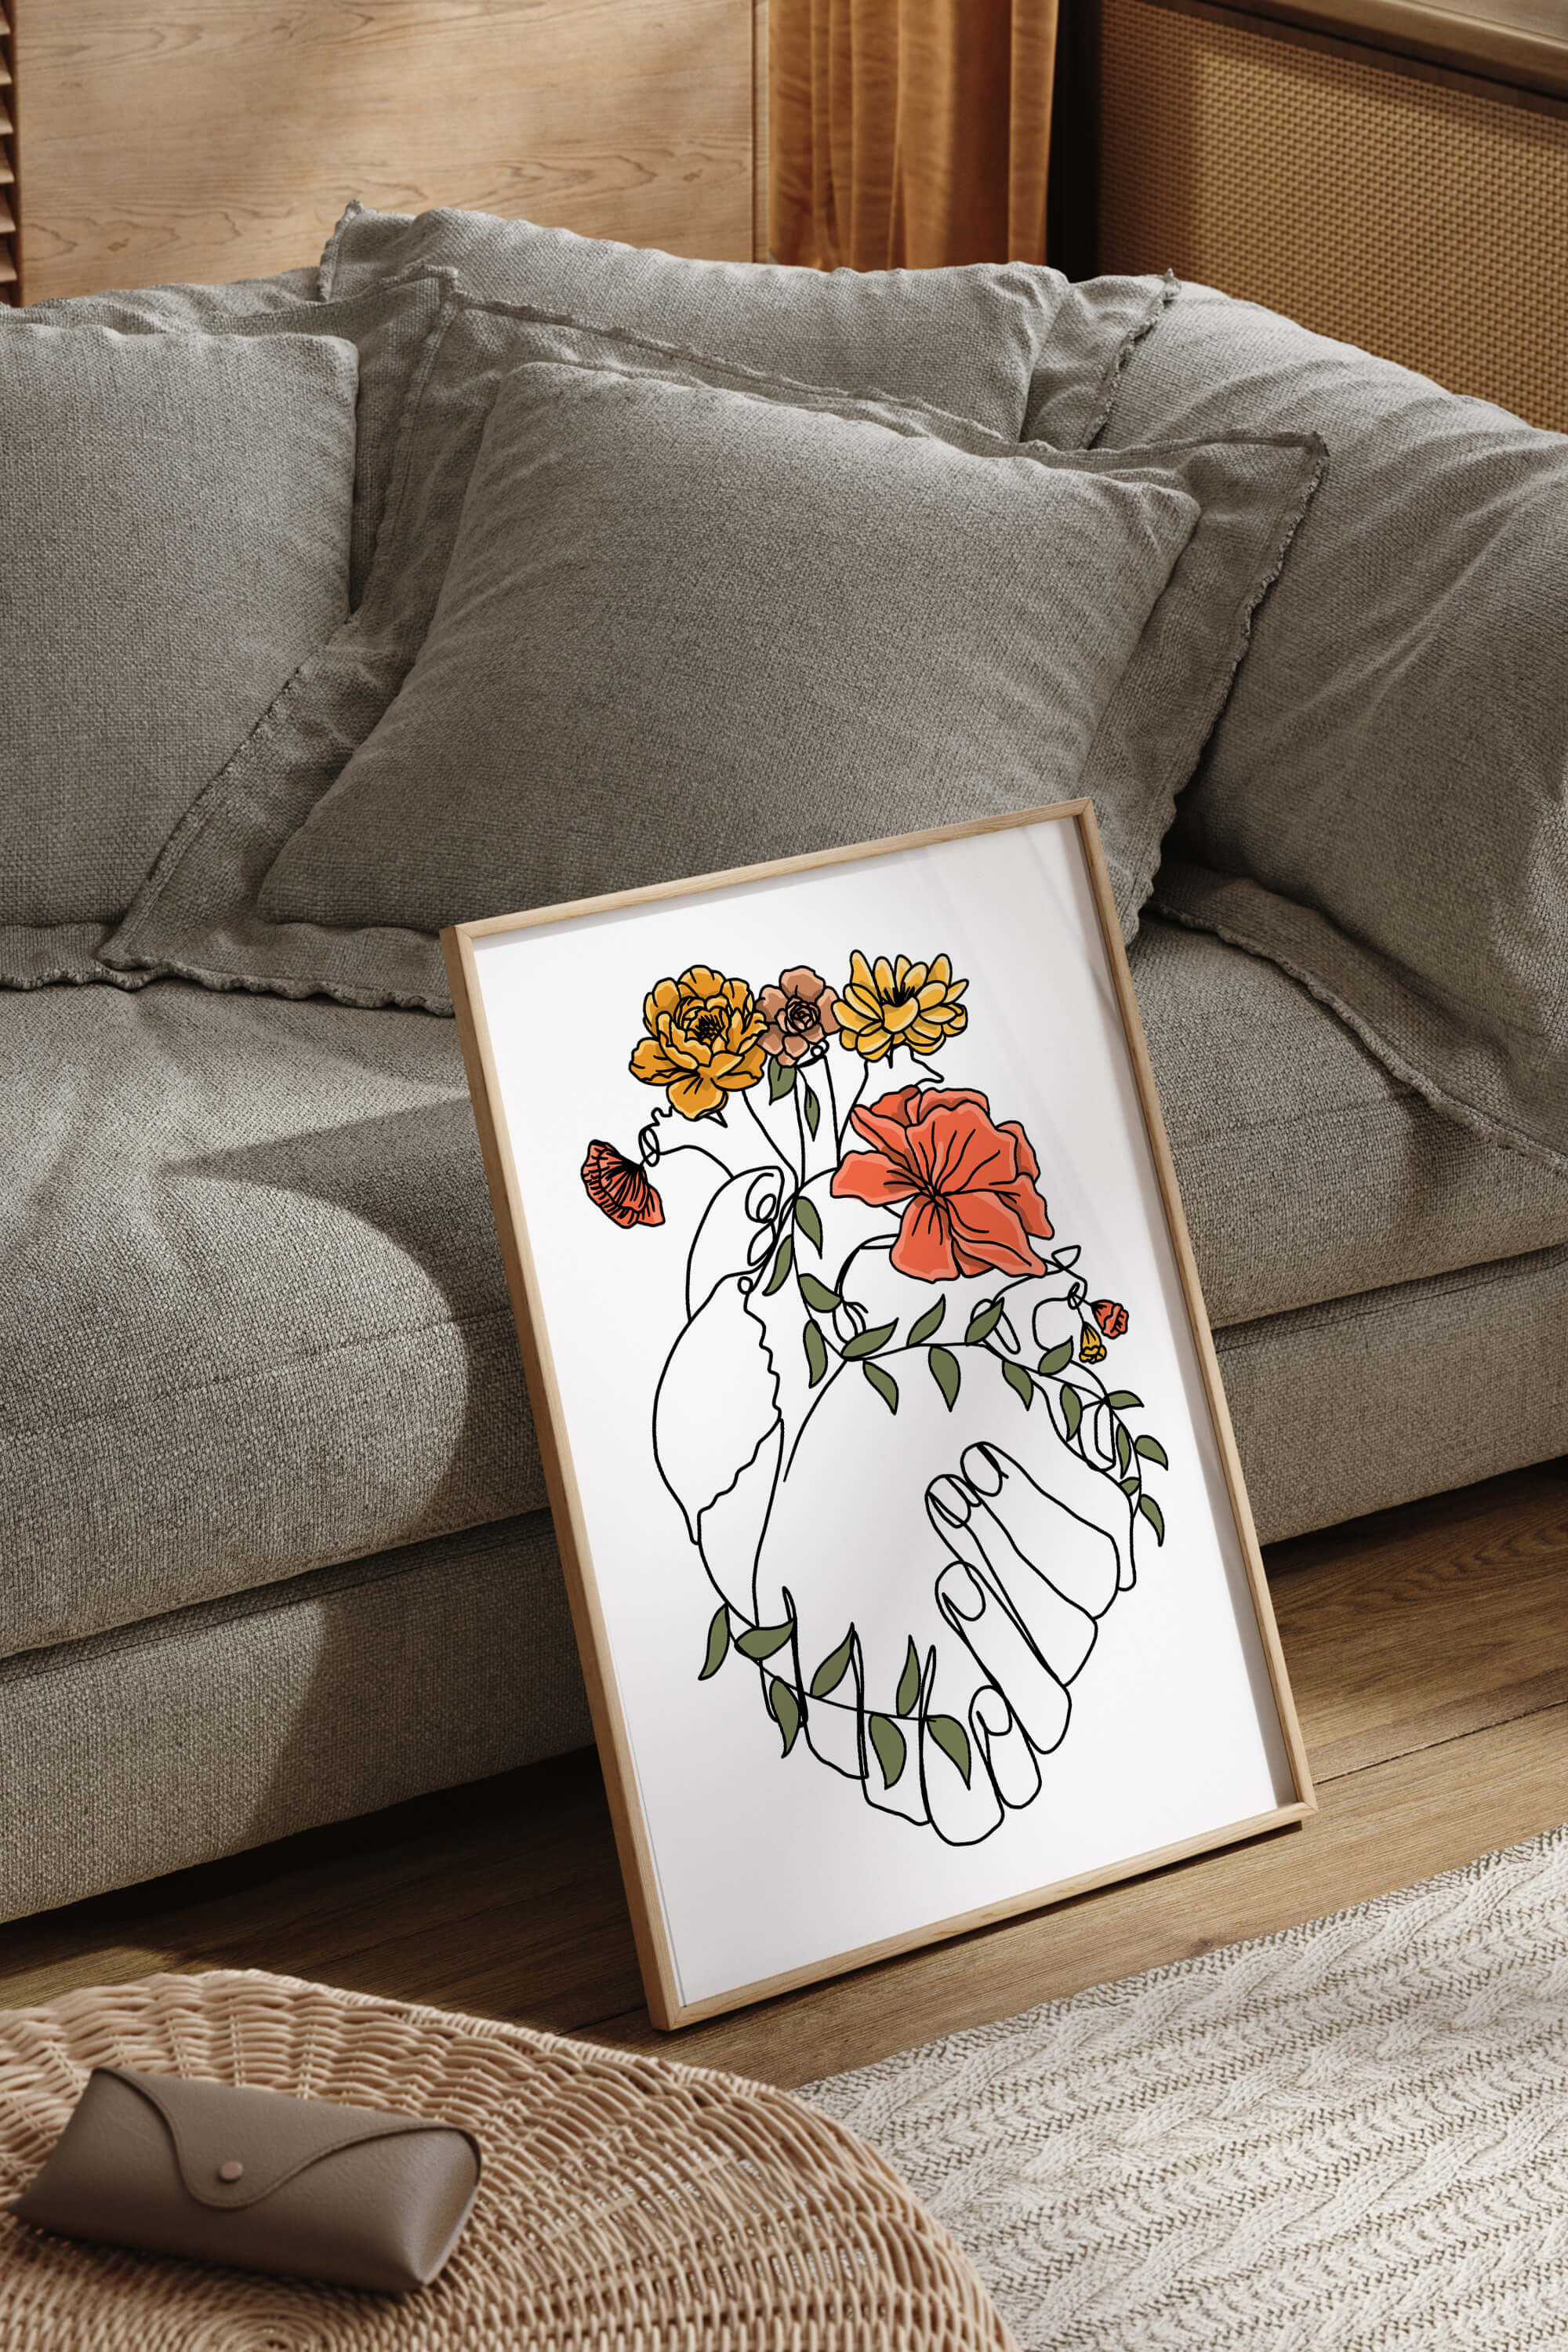 Unique love line art showcasing the intricate connection of floral patterns and heart anatomy, ideal as an intimate anniversary gift.